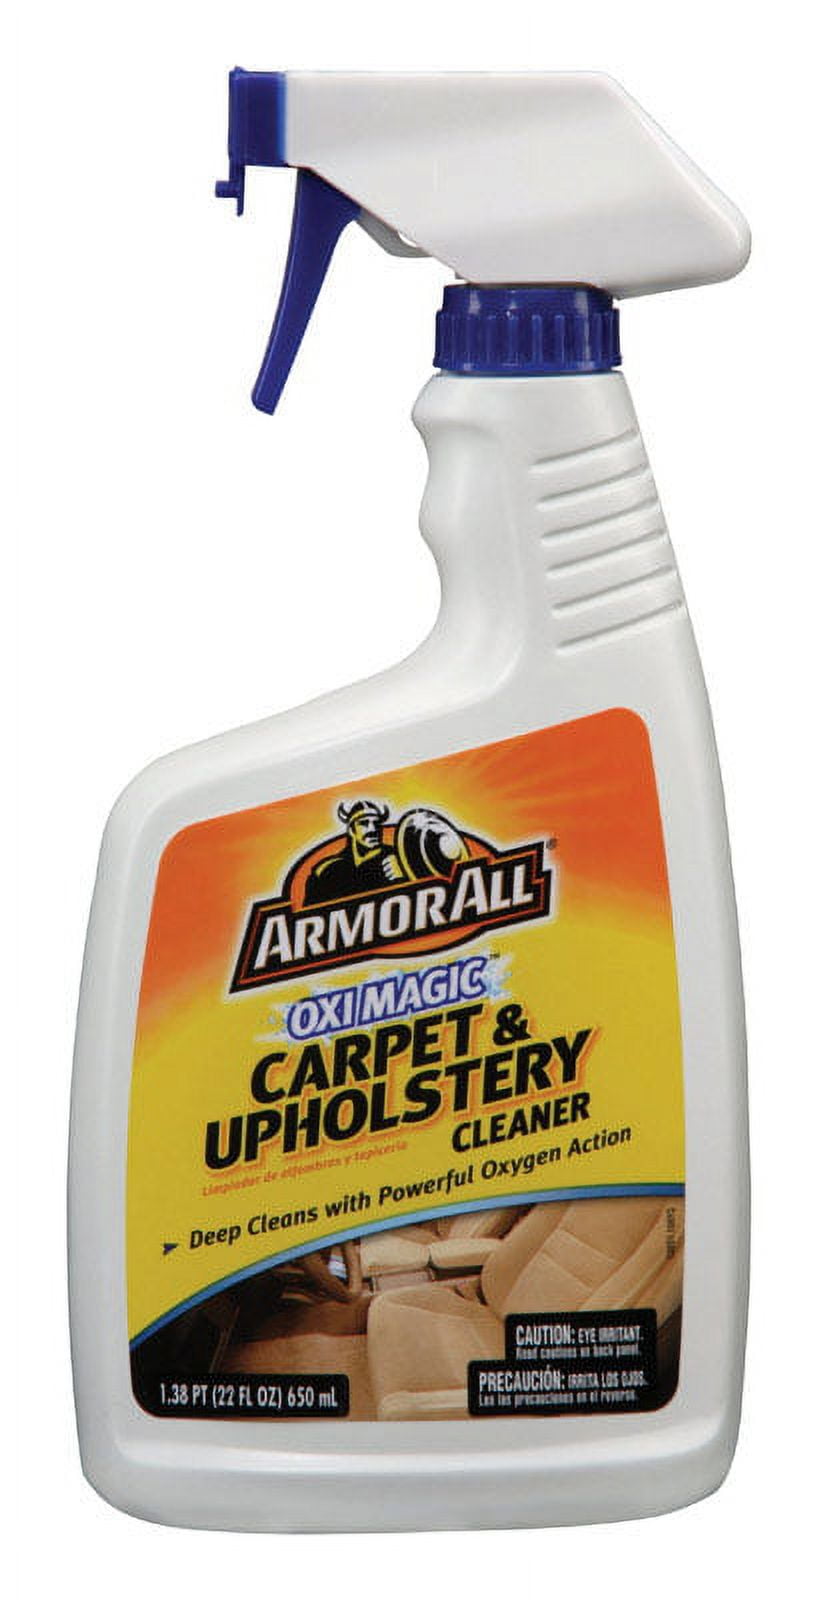 Armor All 78091 Carpet and Upholstery Cleaner, 22 Ounce, Aerosol